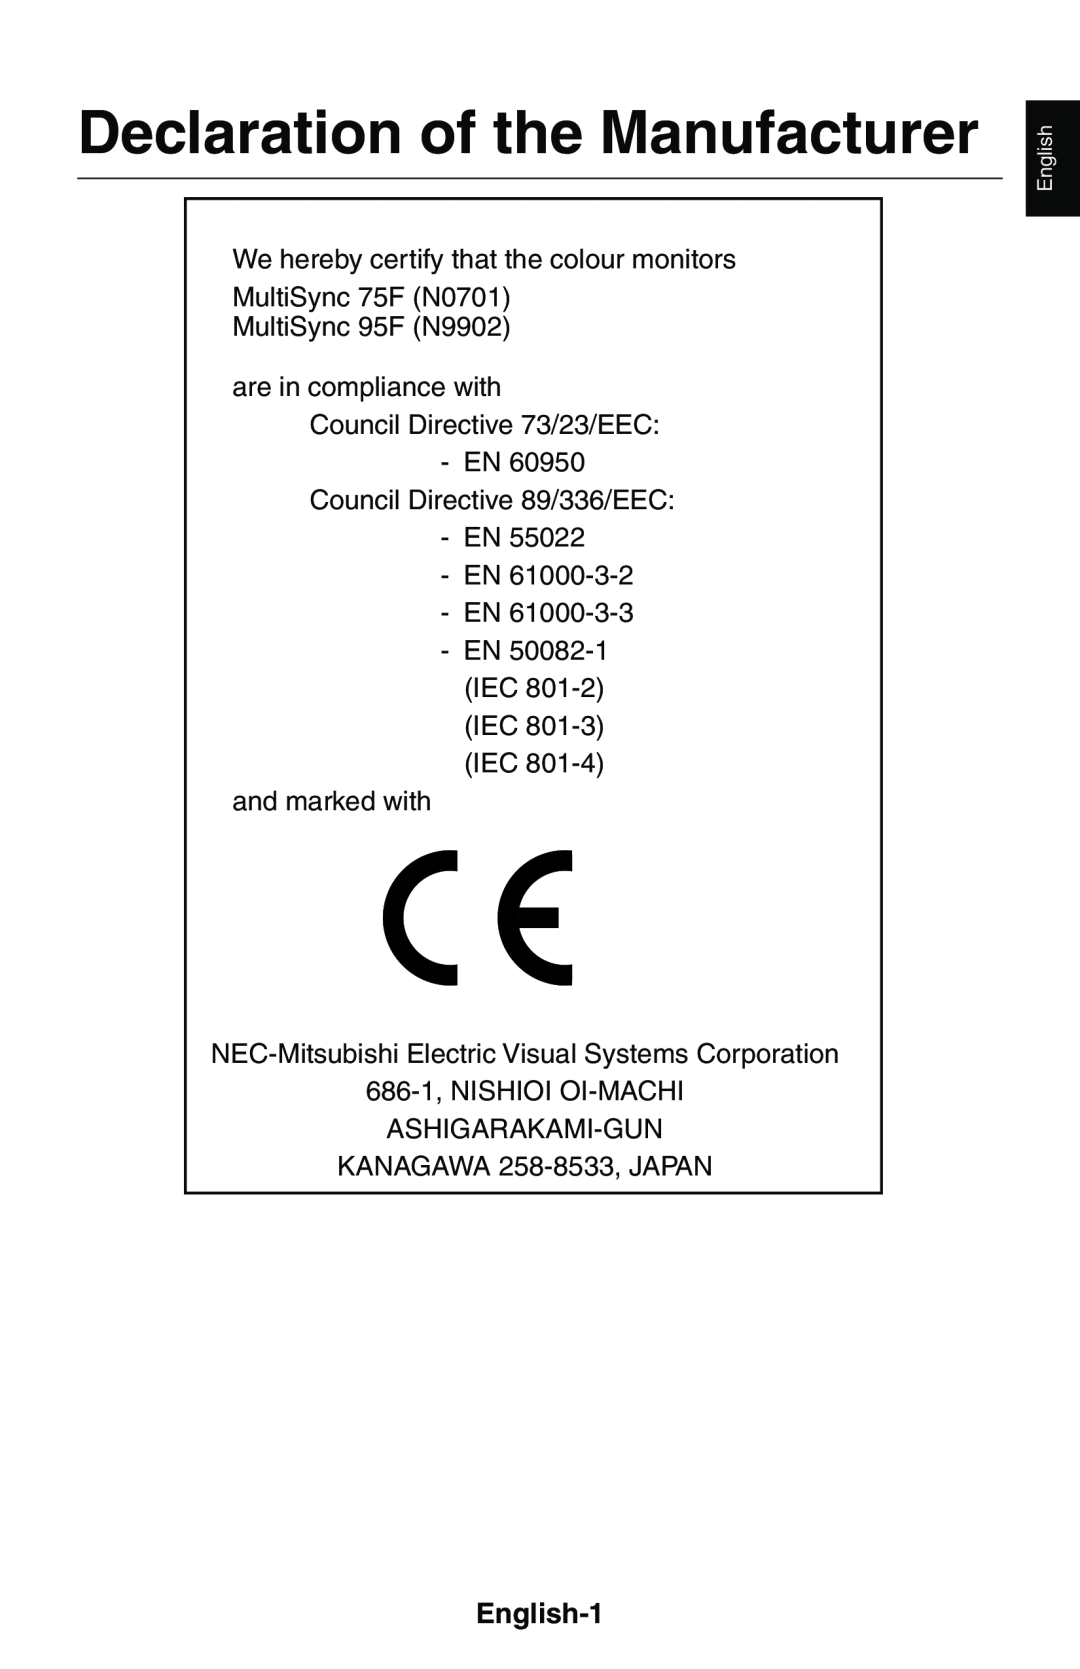 NEC MultiSync 75F user manual English-1, Declaration of the Manufacturer, We hereby certify that the colour monitors 